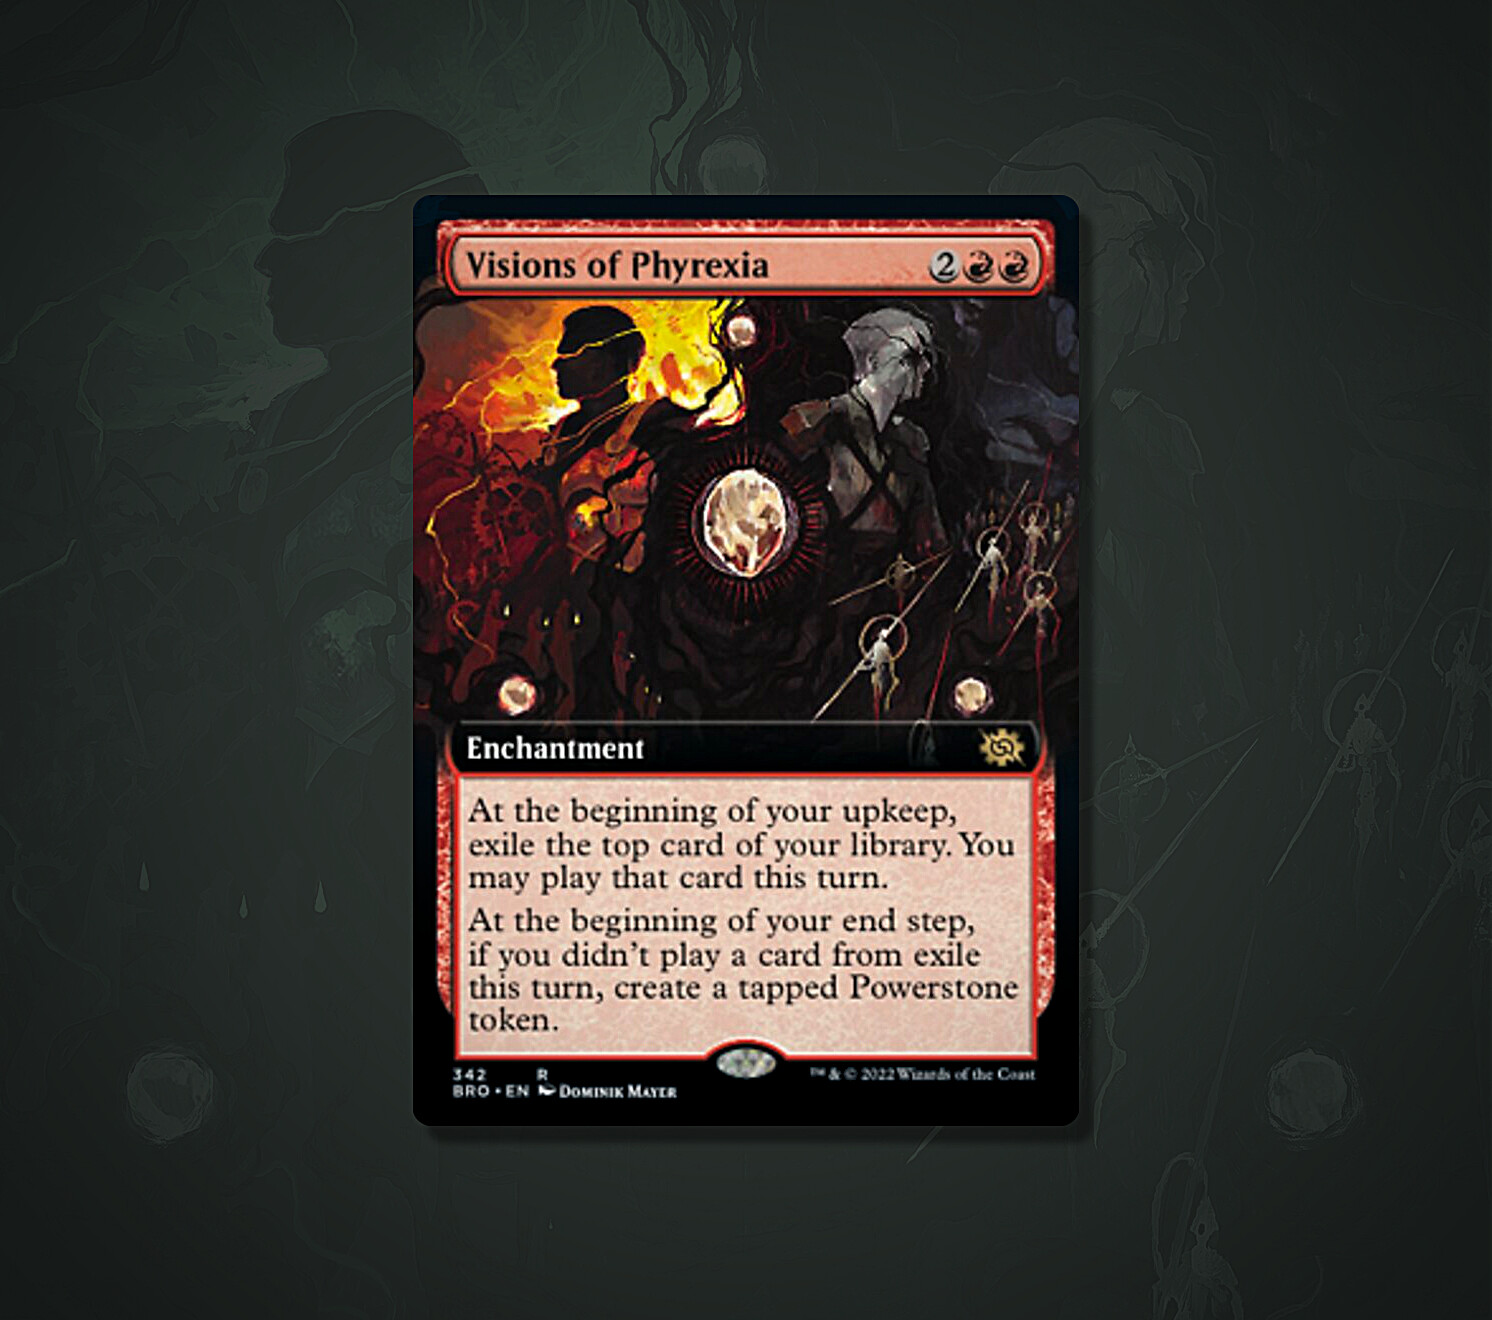 Card image for borderless Visions of Phyrexia.